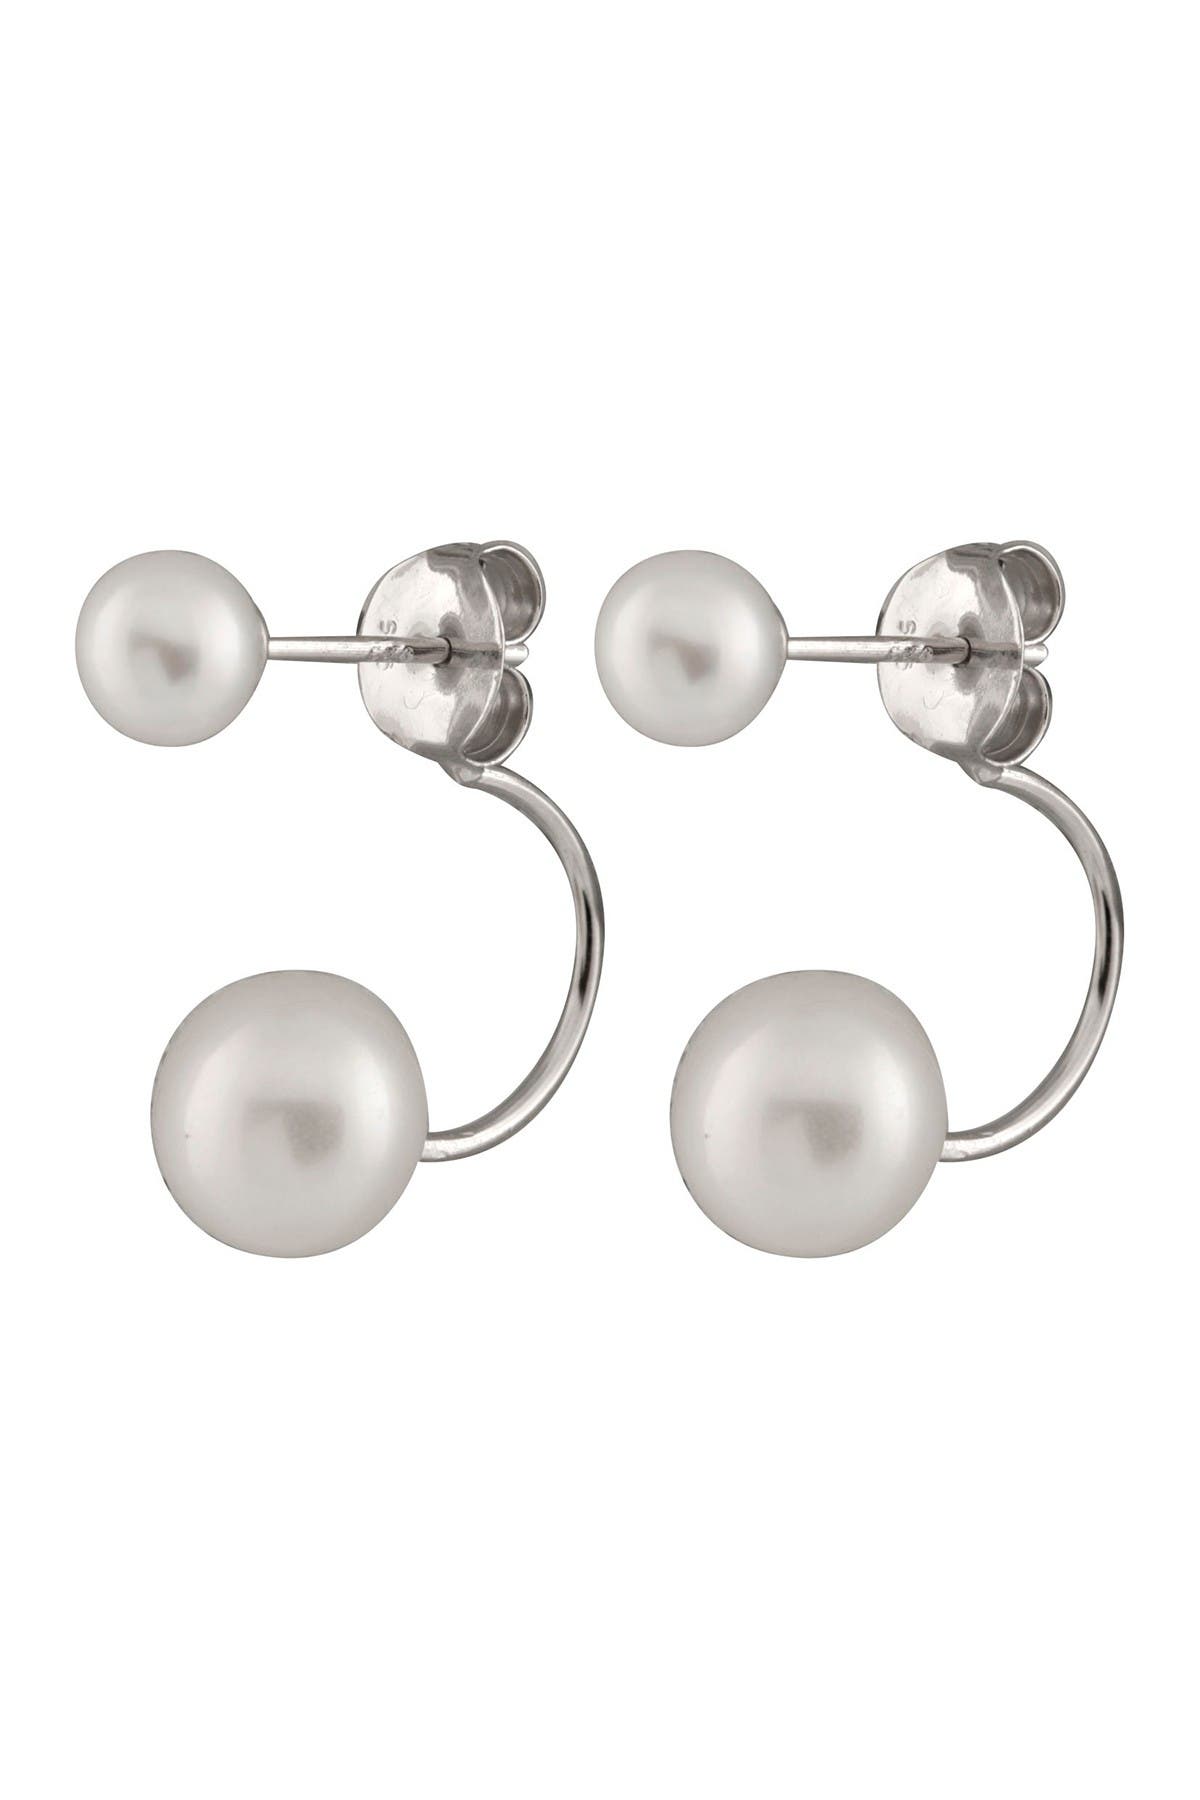 Splendid Pearls Sterling Silver 5.5-8.5mm Double White Cultured Freshwater Pearl Jacket Earrings In Natural White